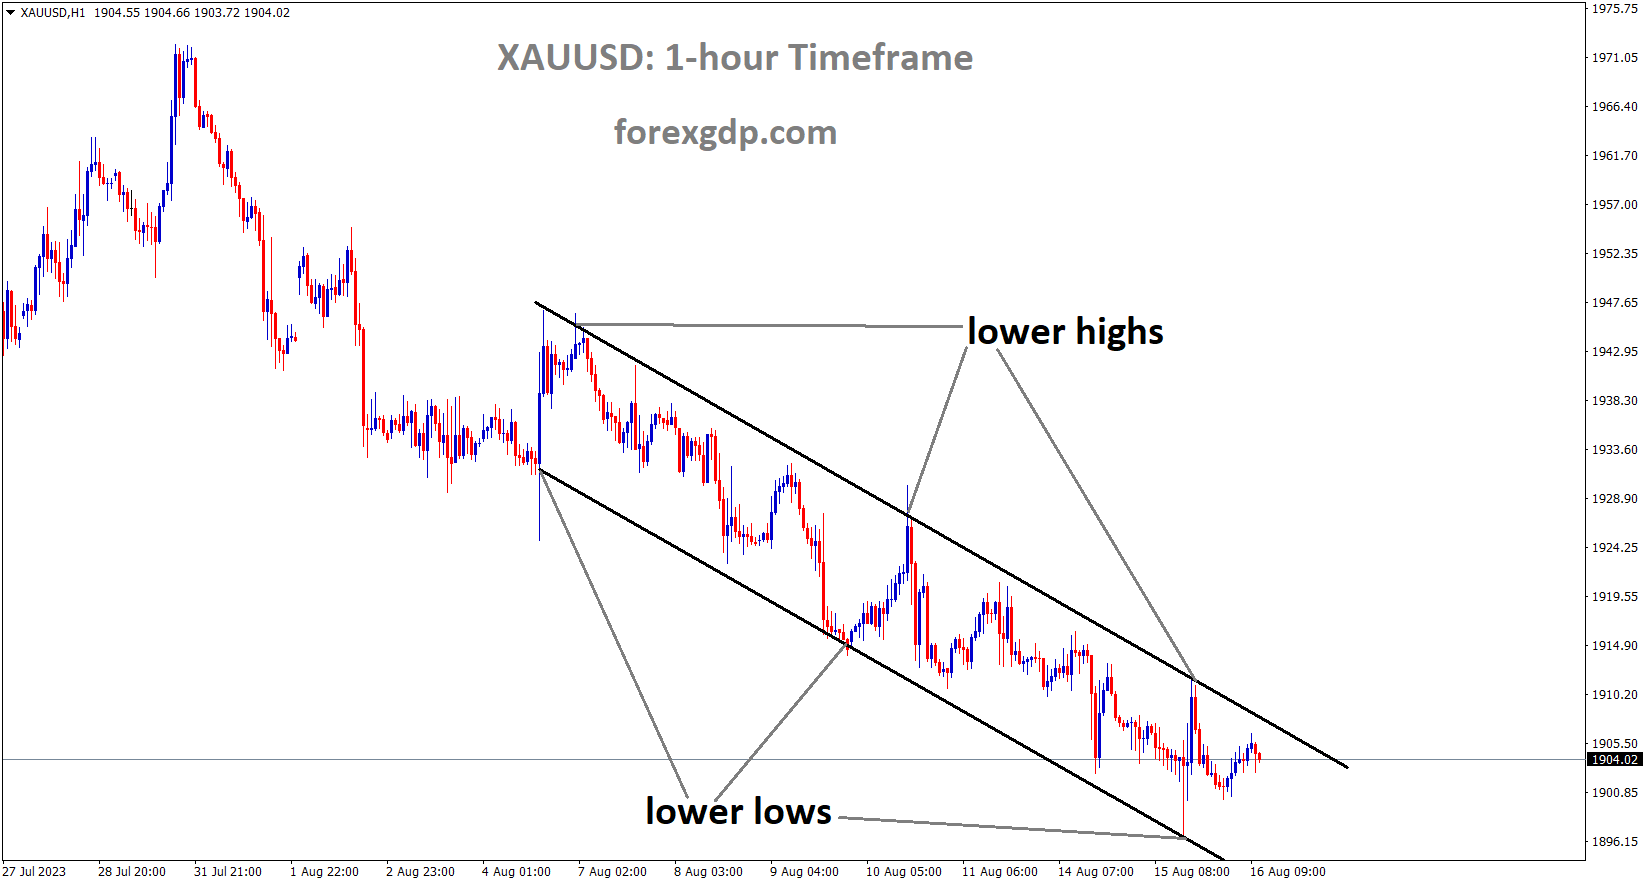 XAUUSD Gold price is moving in the Descending channel and the market has fallen from the lower high area of the channel.